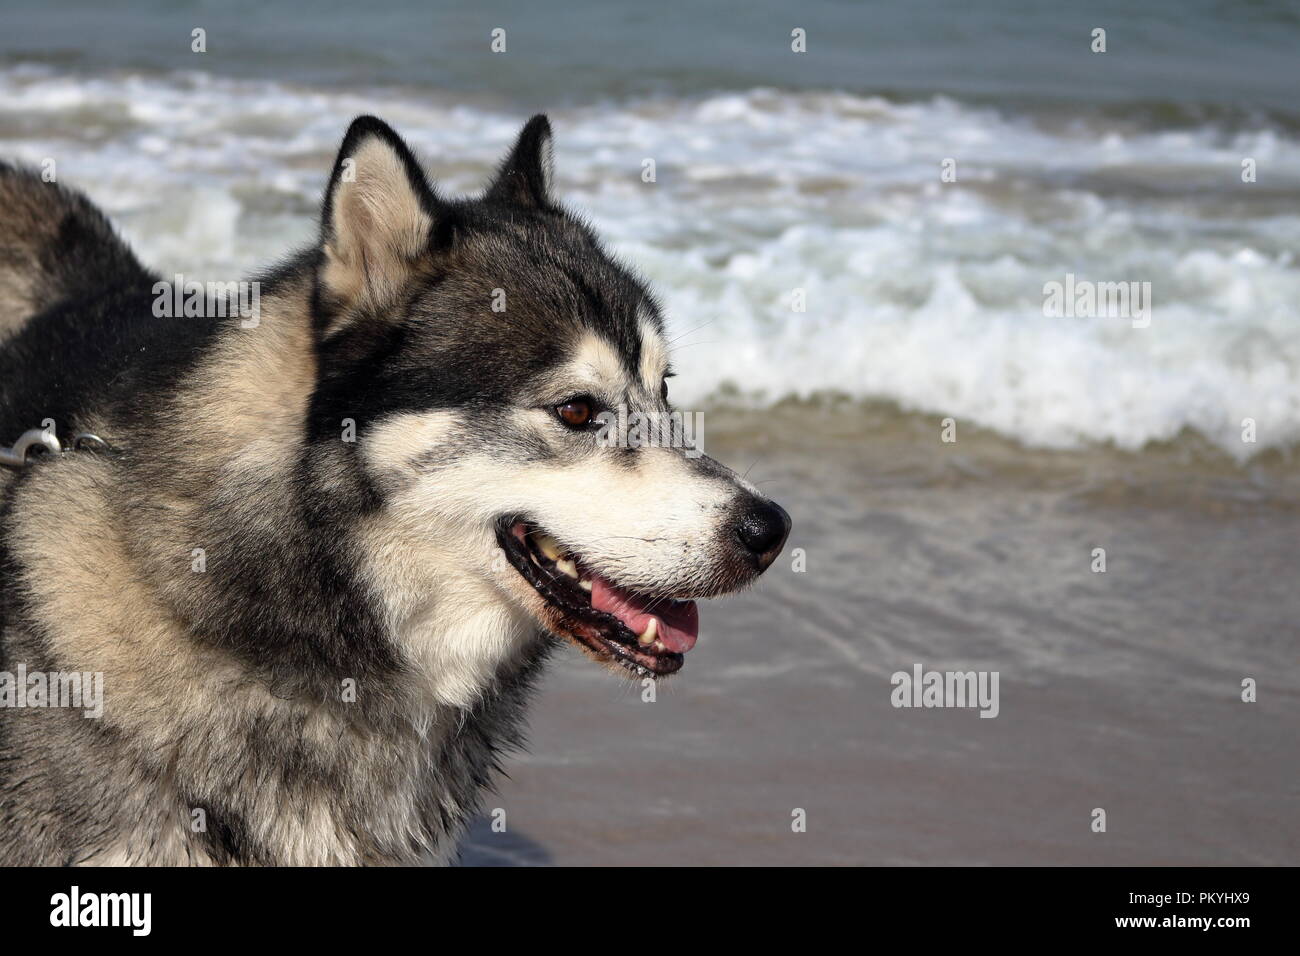 Siberian husky with a breaking wave in the background Stock Photo